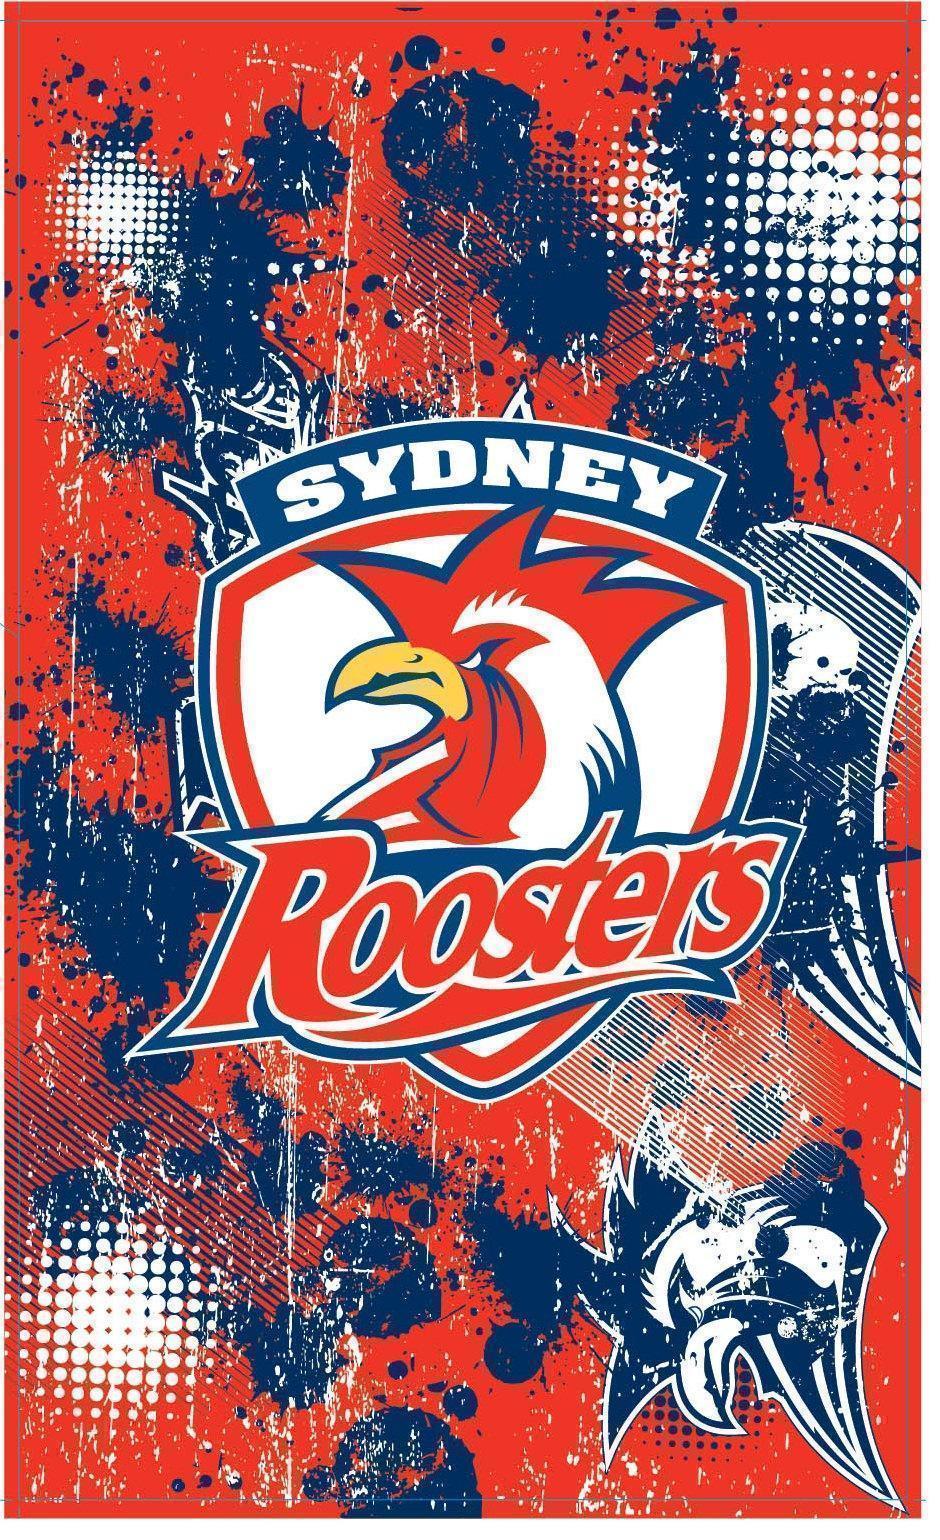 Sydney Roosters NRL licensed cape or wall flag